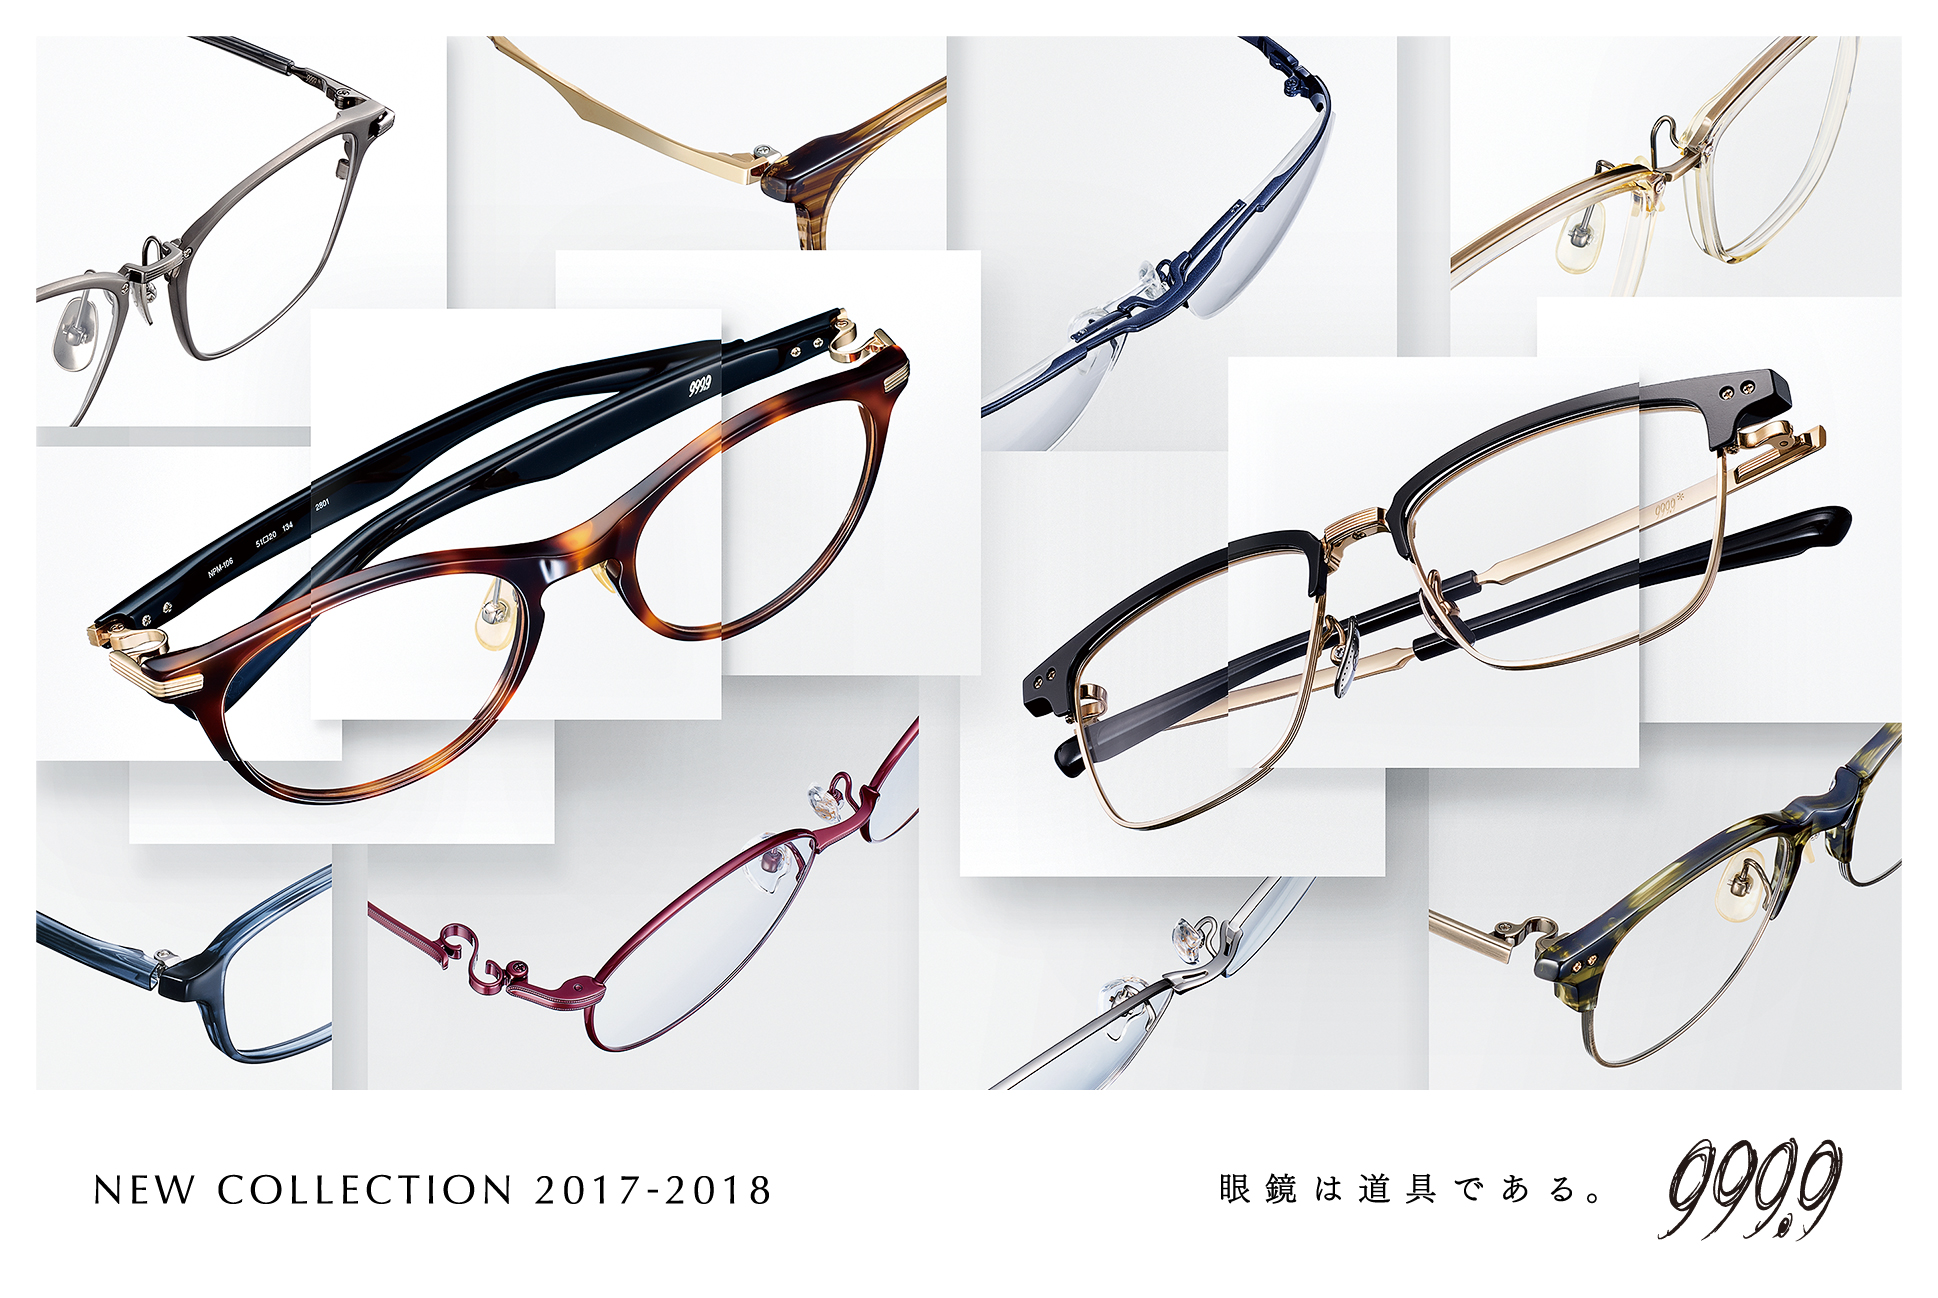 999,9　New Collection 2017-2018